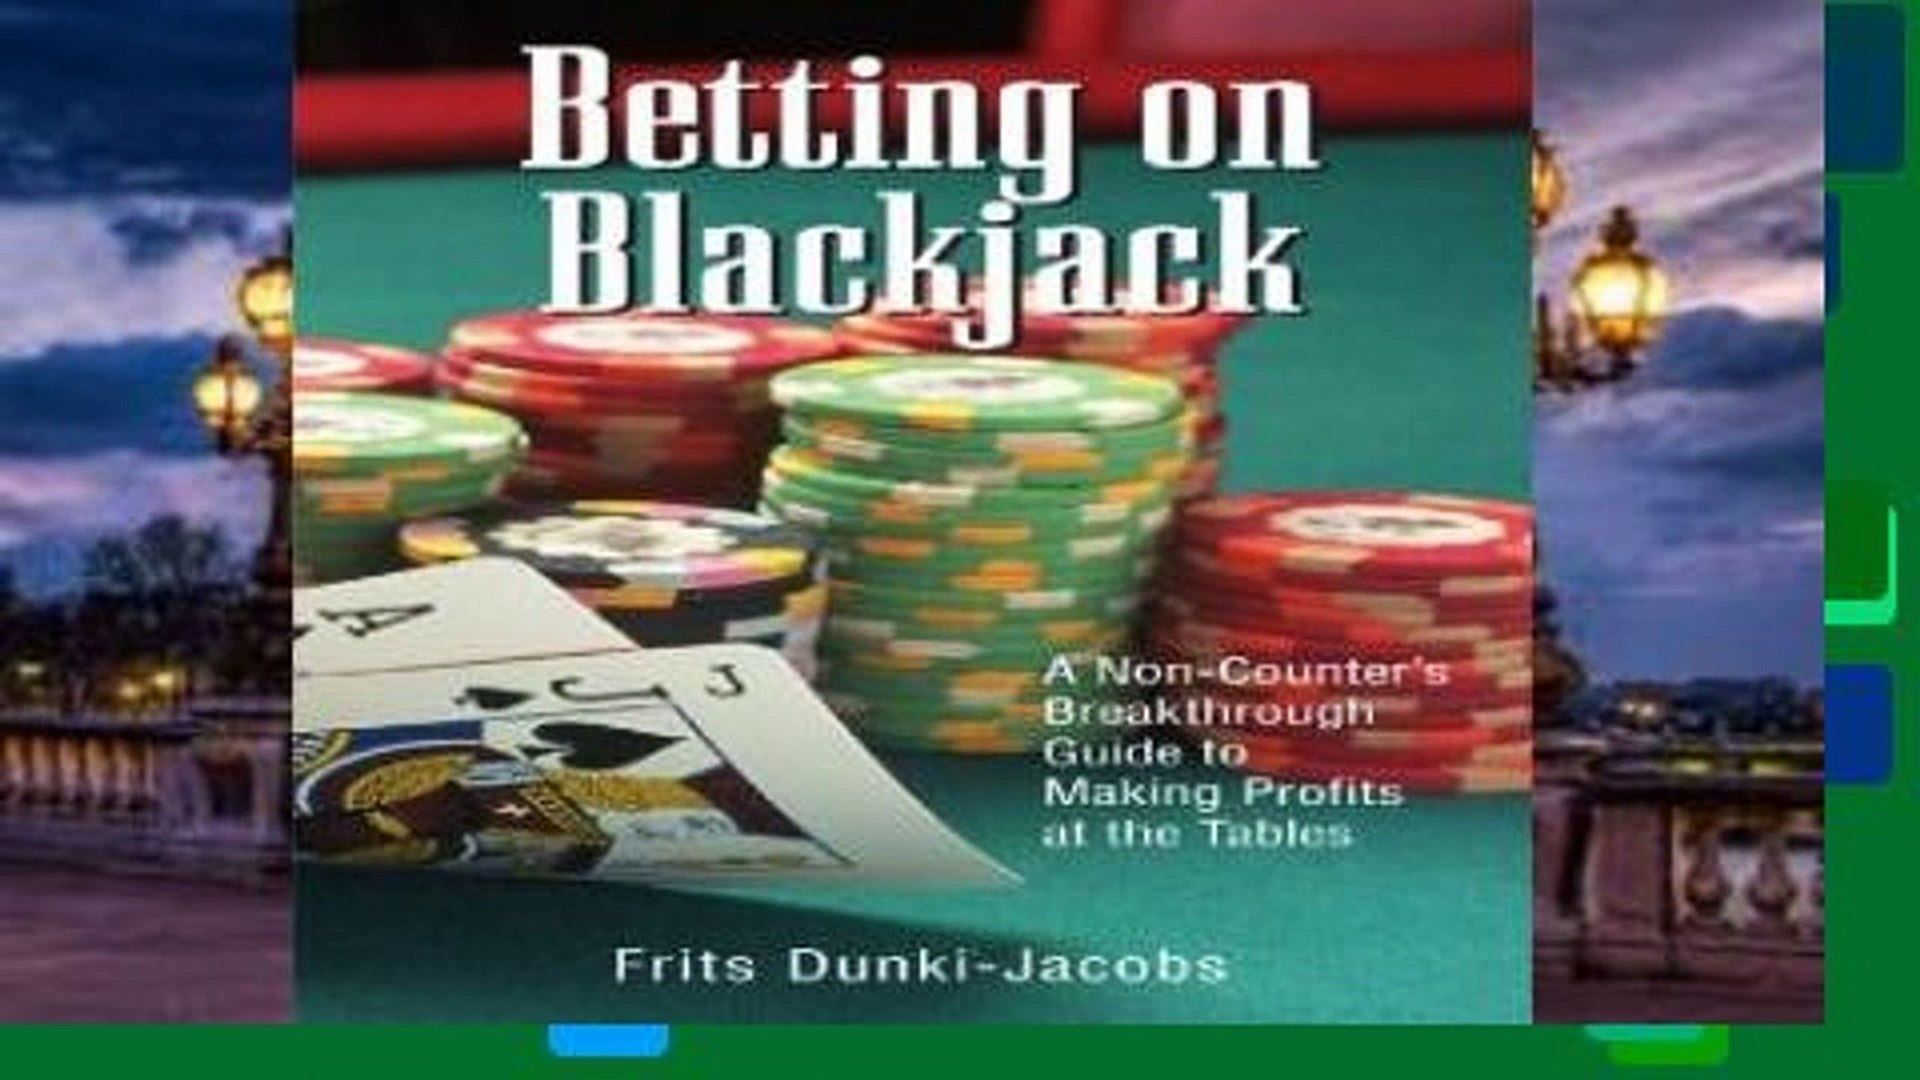 Reading Betting On Blackjack: A Non-Counter s Breakthrough Guide to Making Profits at the Tables